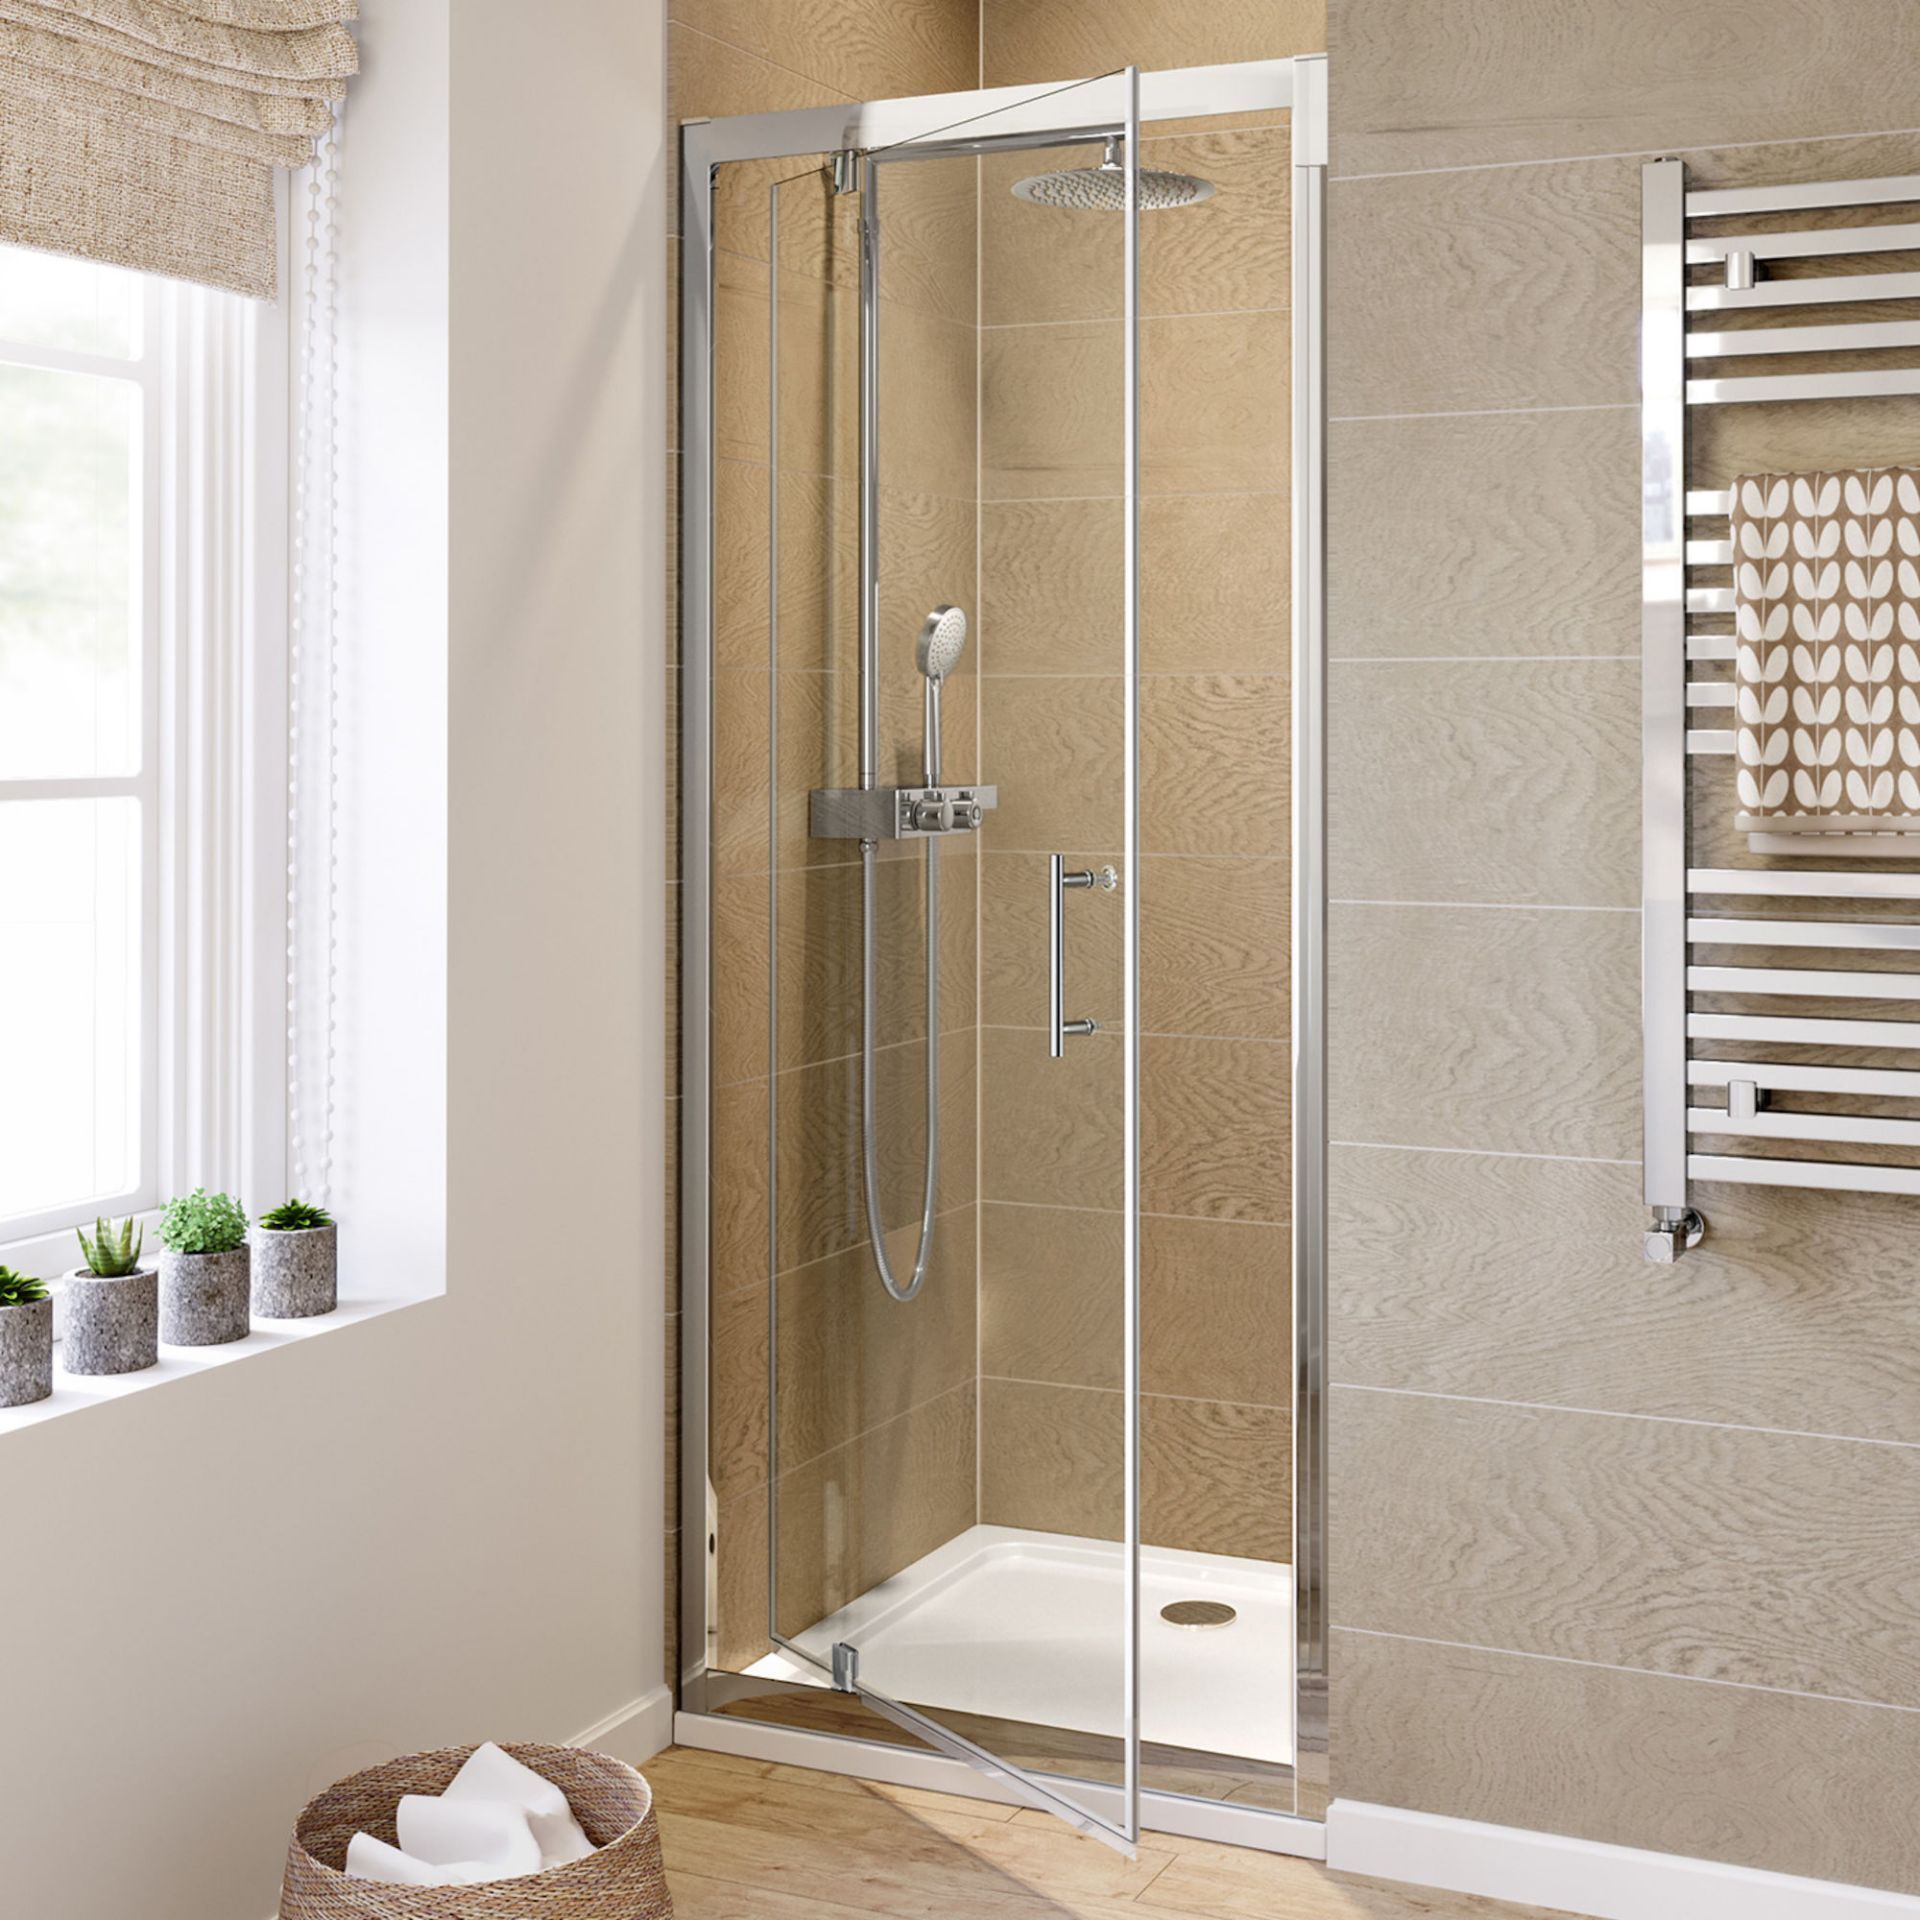 NEW (REF144) 760mm 6mm - Elements Pivot 760mm Shower Door 6mm. Safety Glass Fully waterproof